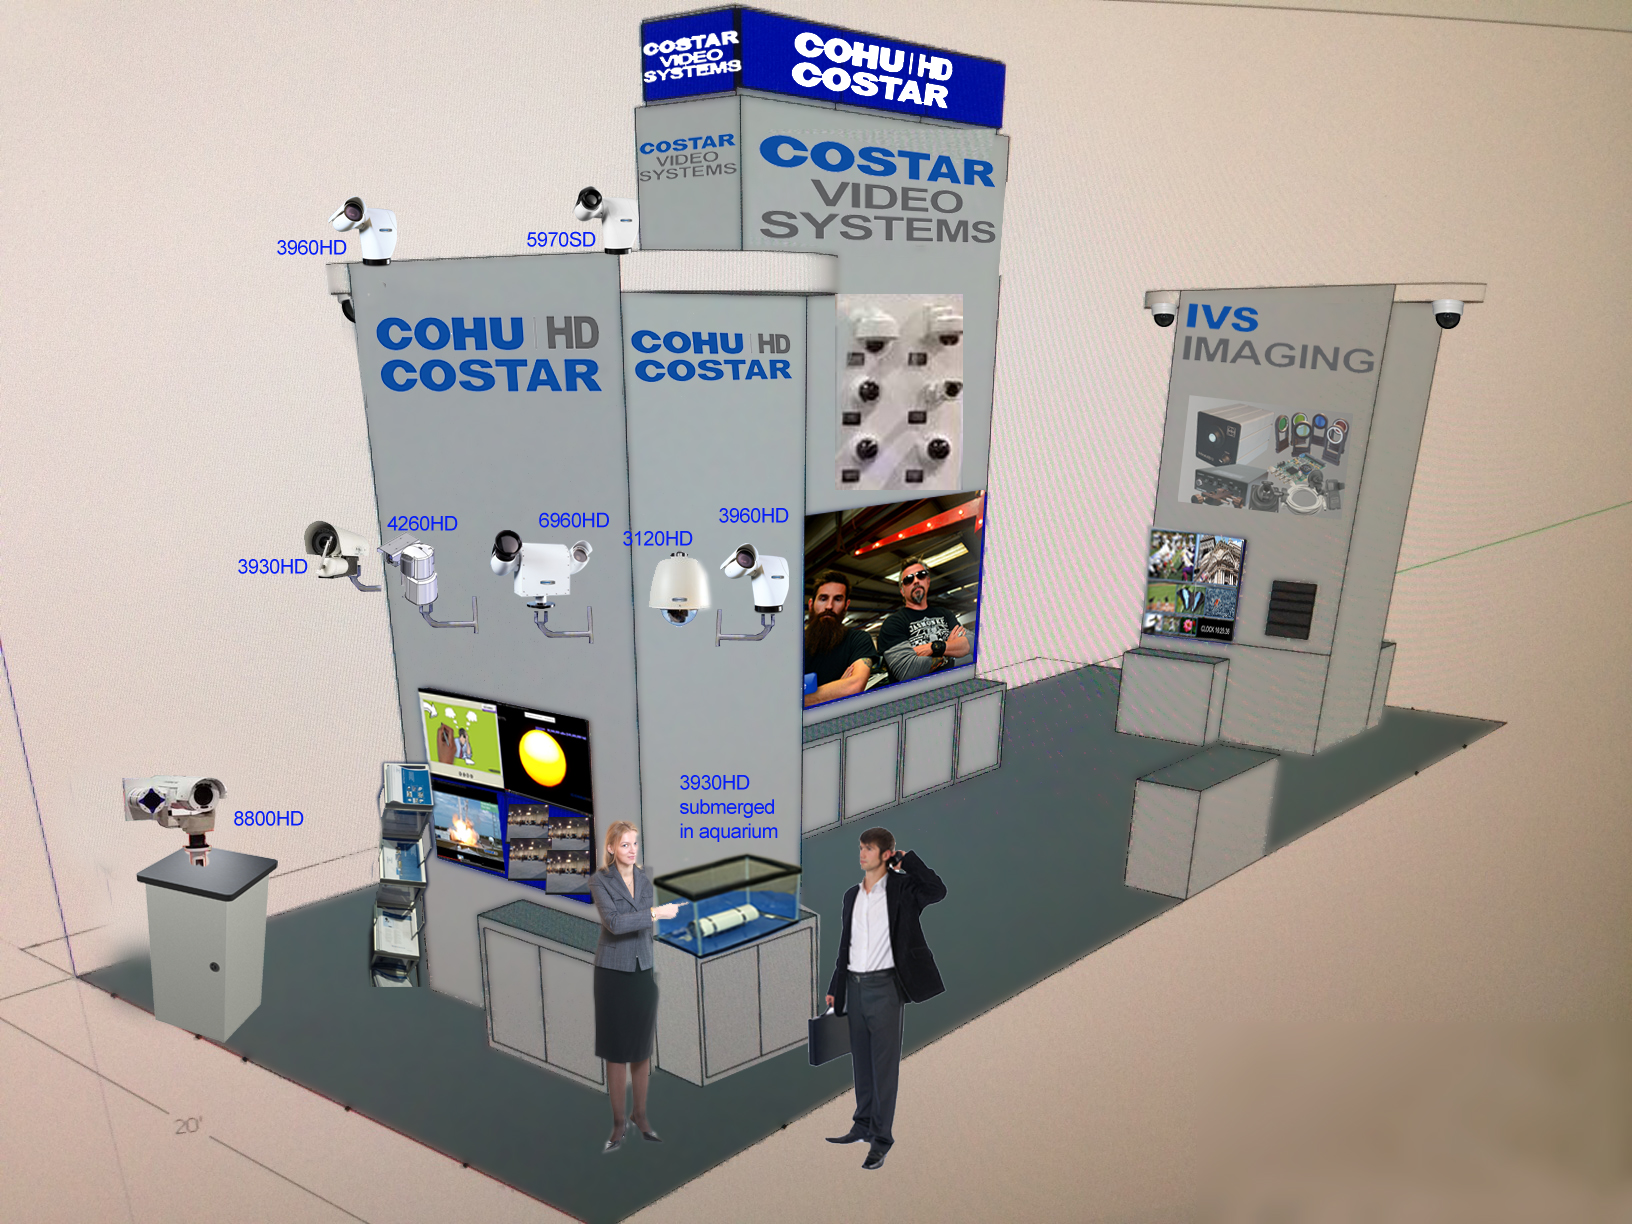 CohuHD Costar, Costar Video Systems and IVS Imaging will exhibit in  20’x40’ booth 11099 at ISC West, April 15 – 17, 2015